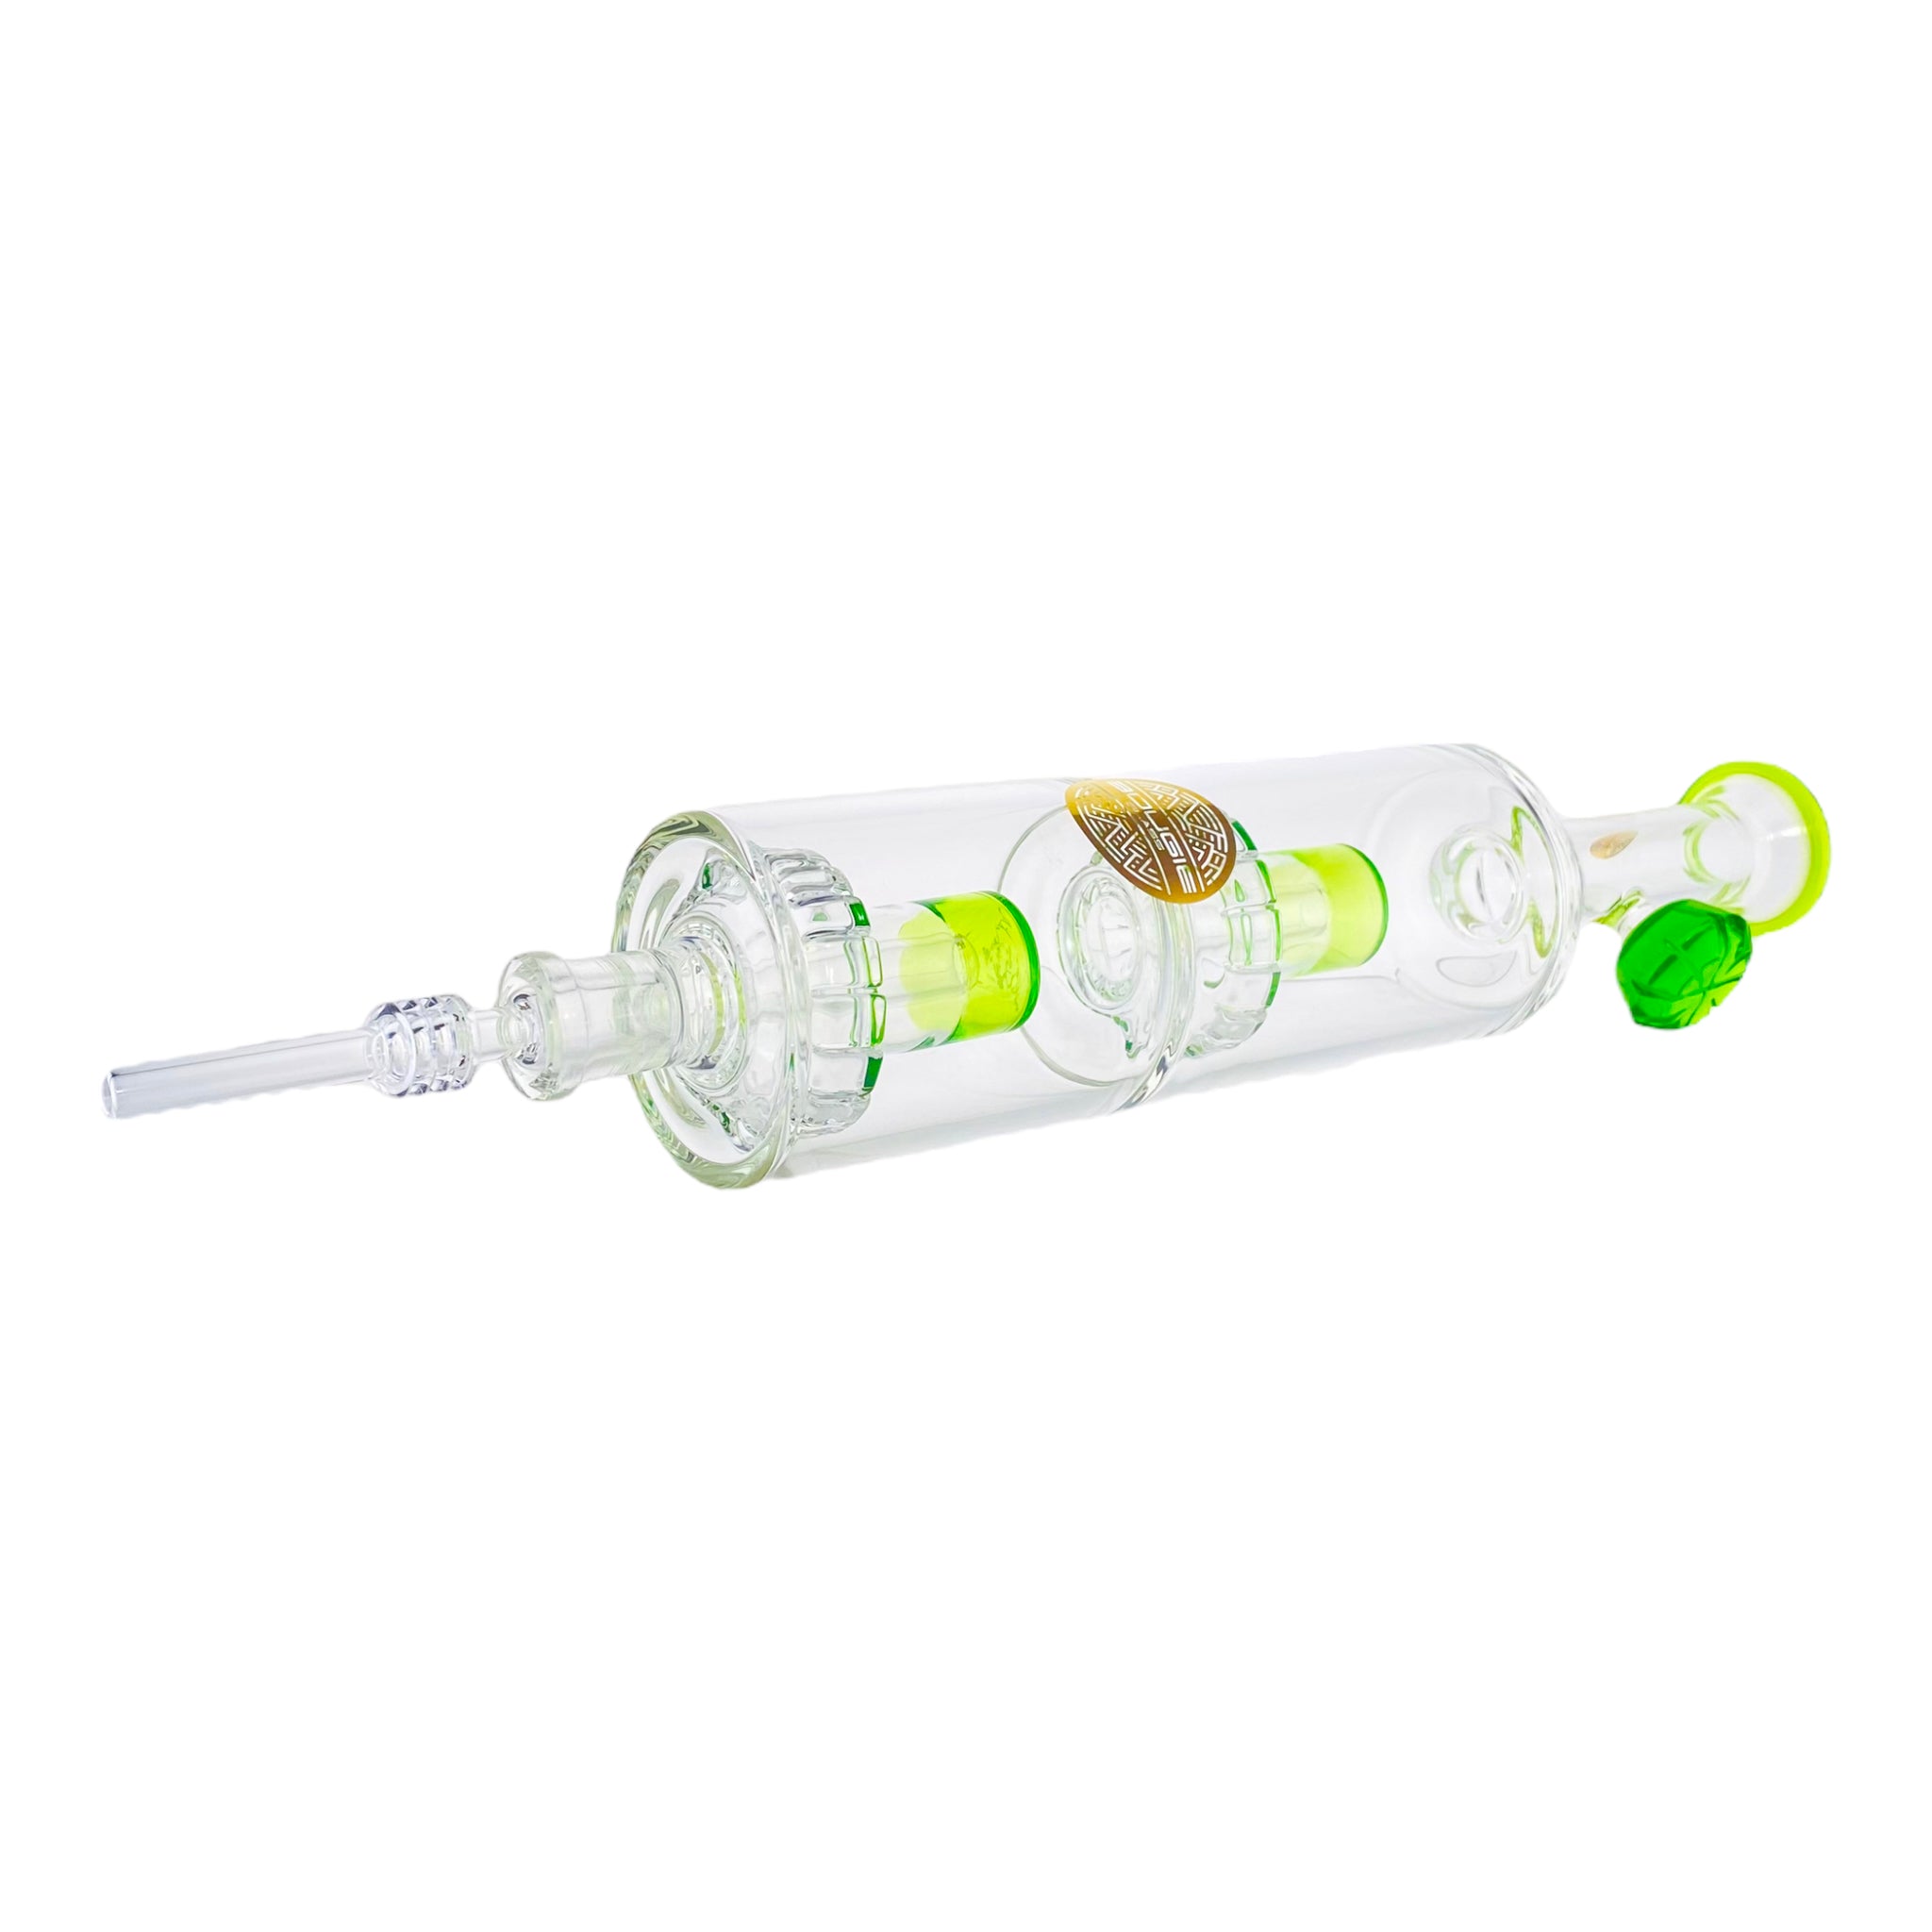 NS10 – 8.5″ Silicone/Glass Nectar Collector